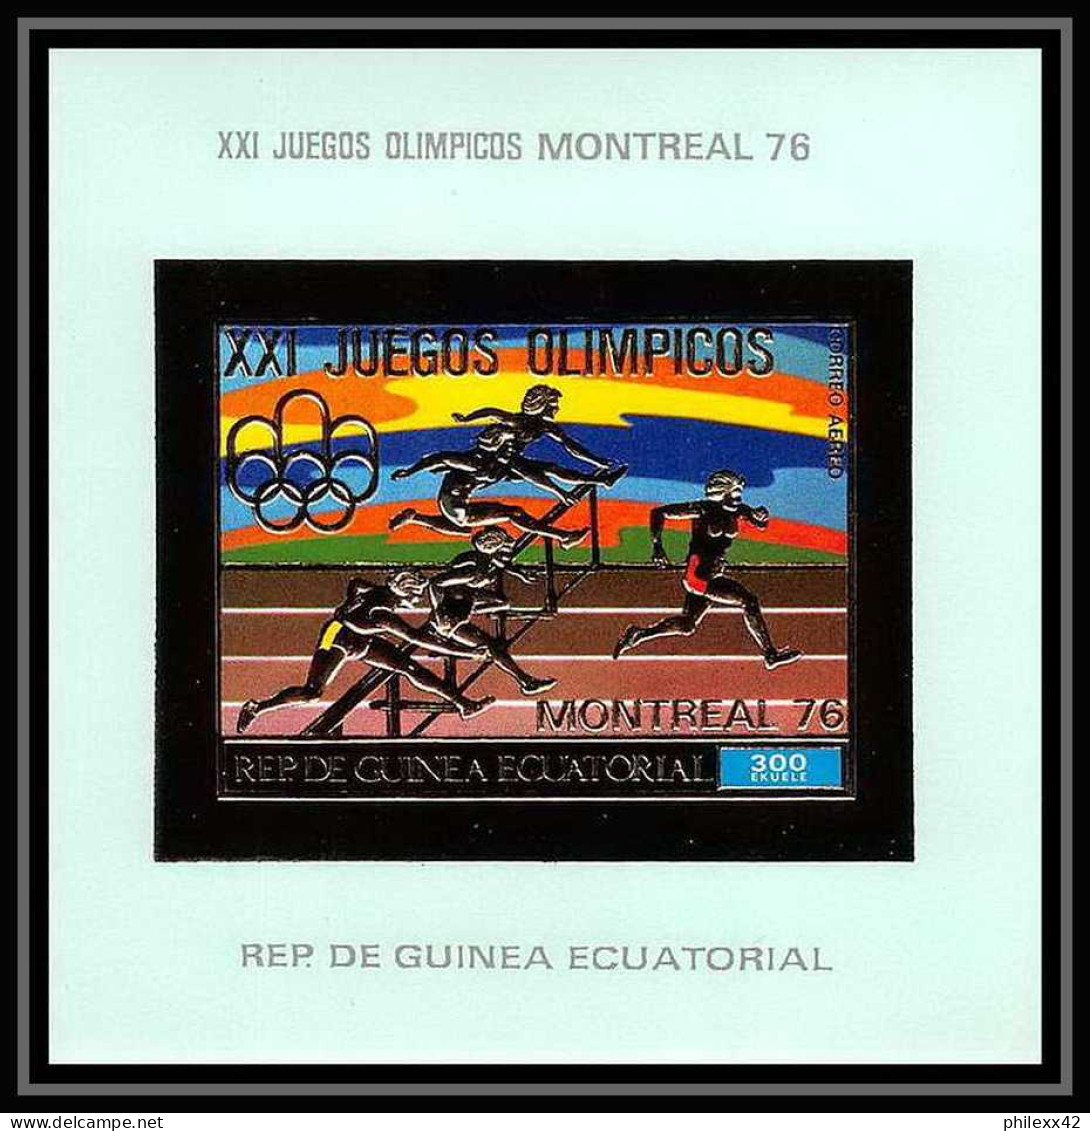 195 Guinée équatoriale Guinea N°874 Non Dentelé OR Gold Stamps Jeux Olympiques Olympic Games 1976 Montreal Running - Pallavolo